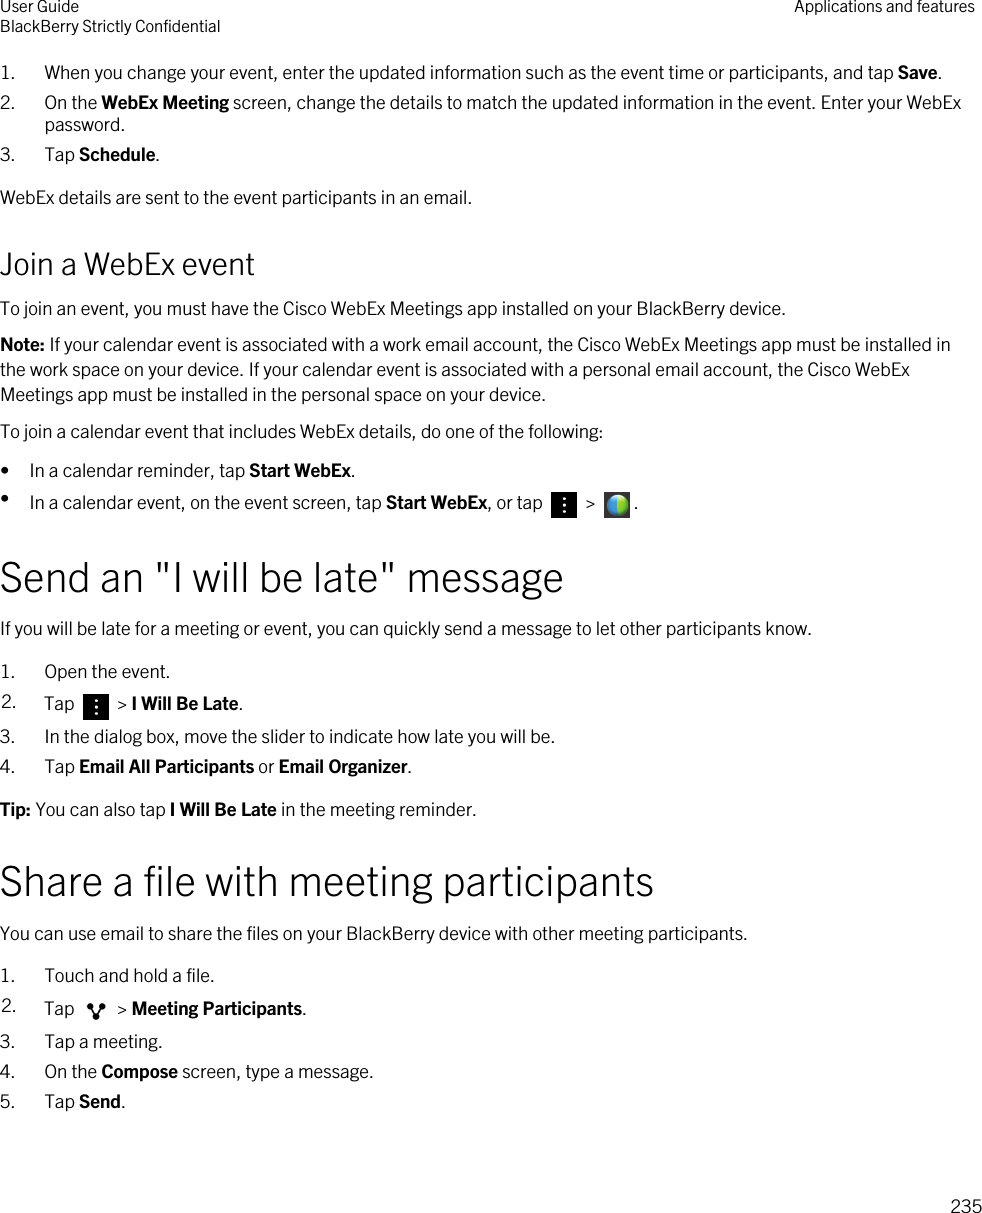 1. When you change your event, enter the updated information such as the event time or participants, and tap Save.2. On the WebEx Meeting screen, change the details to match the updated information in the event. Enter your WebEx password.3. Tap Schedule.WebEx details are sent to the event participants in an email.Join a WebEx eventTo join an event, you must have the Cisco WebEx Meetings app installed on your BlackBerry device.Note: If your calendar event is associated with a work email account, the Cisco WebEx Meetings app must be installed in the work space on your device. If your calendar event is associated with a personal email account, the Cisco WebEx Meetings app must be installed in the personal space on your device.To join a calendar event that includes WebEx details, do one of the following:• In a calendar reminder, tap Start WebEx.•In a calendar event, on the event screen, tap Start WebEx, or tap   &gt;  .Send an &quot;I will be late&quot; messageIf you will be late for a meeting or event, you can quickly send a message to let other participants know.1. Open the event.2. Tap   &gt; I Will Be Late.3. In the dialog box, move the slider to indicate how late you will be.4. Tap Email All Participants or Email Organizer.Tip: You can also tap I Will Be Late in the meeting reminder.Share a file with meeting participantsYou can use email to share the files on your BlackBerry device with other meeting participants.1. Touch and hold a file.2. Tap   &gt; Meeting Participants.3. Tap a meeting.4. On the Compose screen, type a message.5. Tap Send.User GuideBlackBerry Strictly Confidential Applications and features235